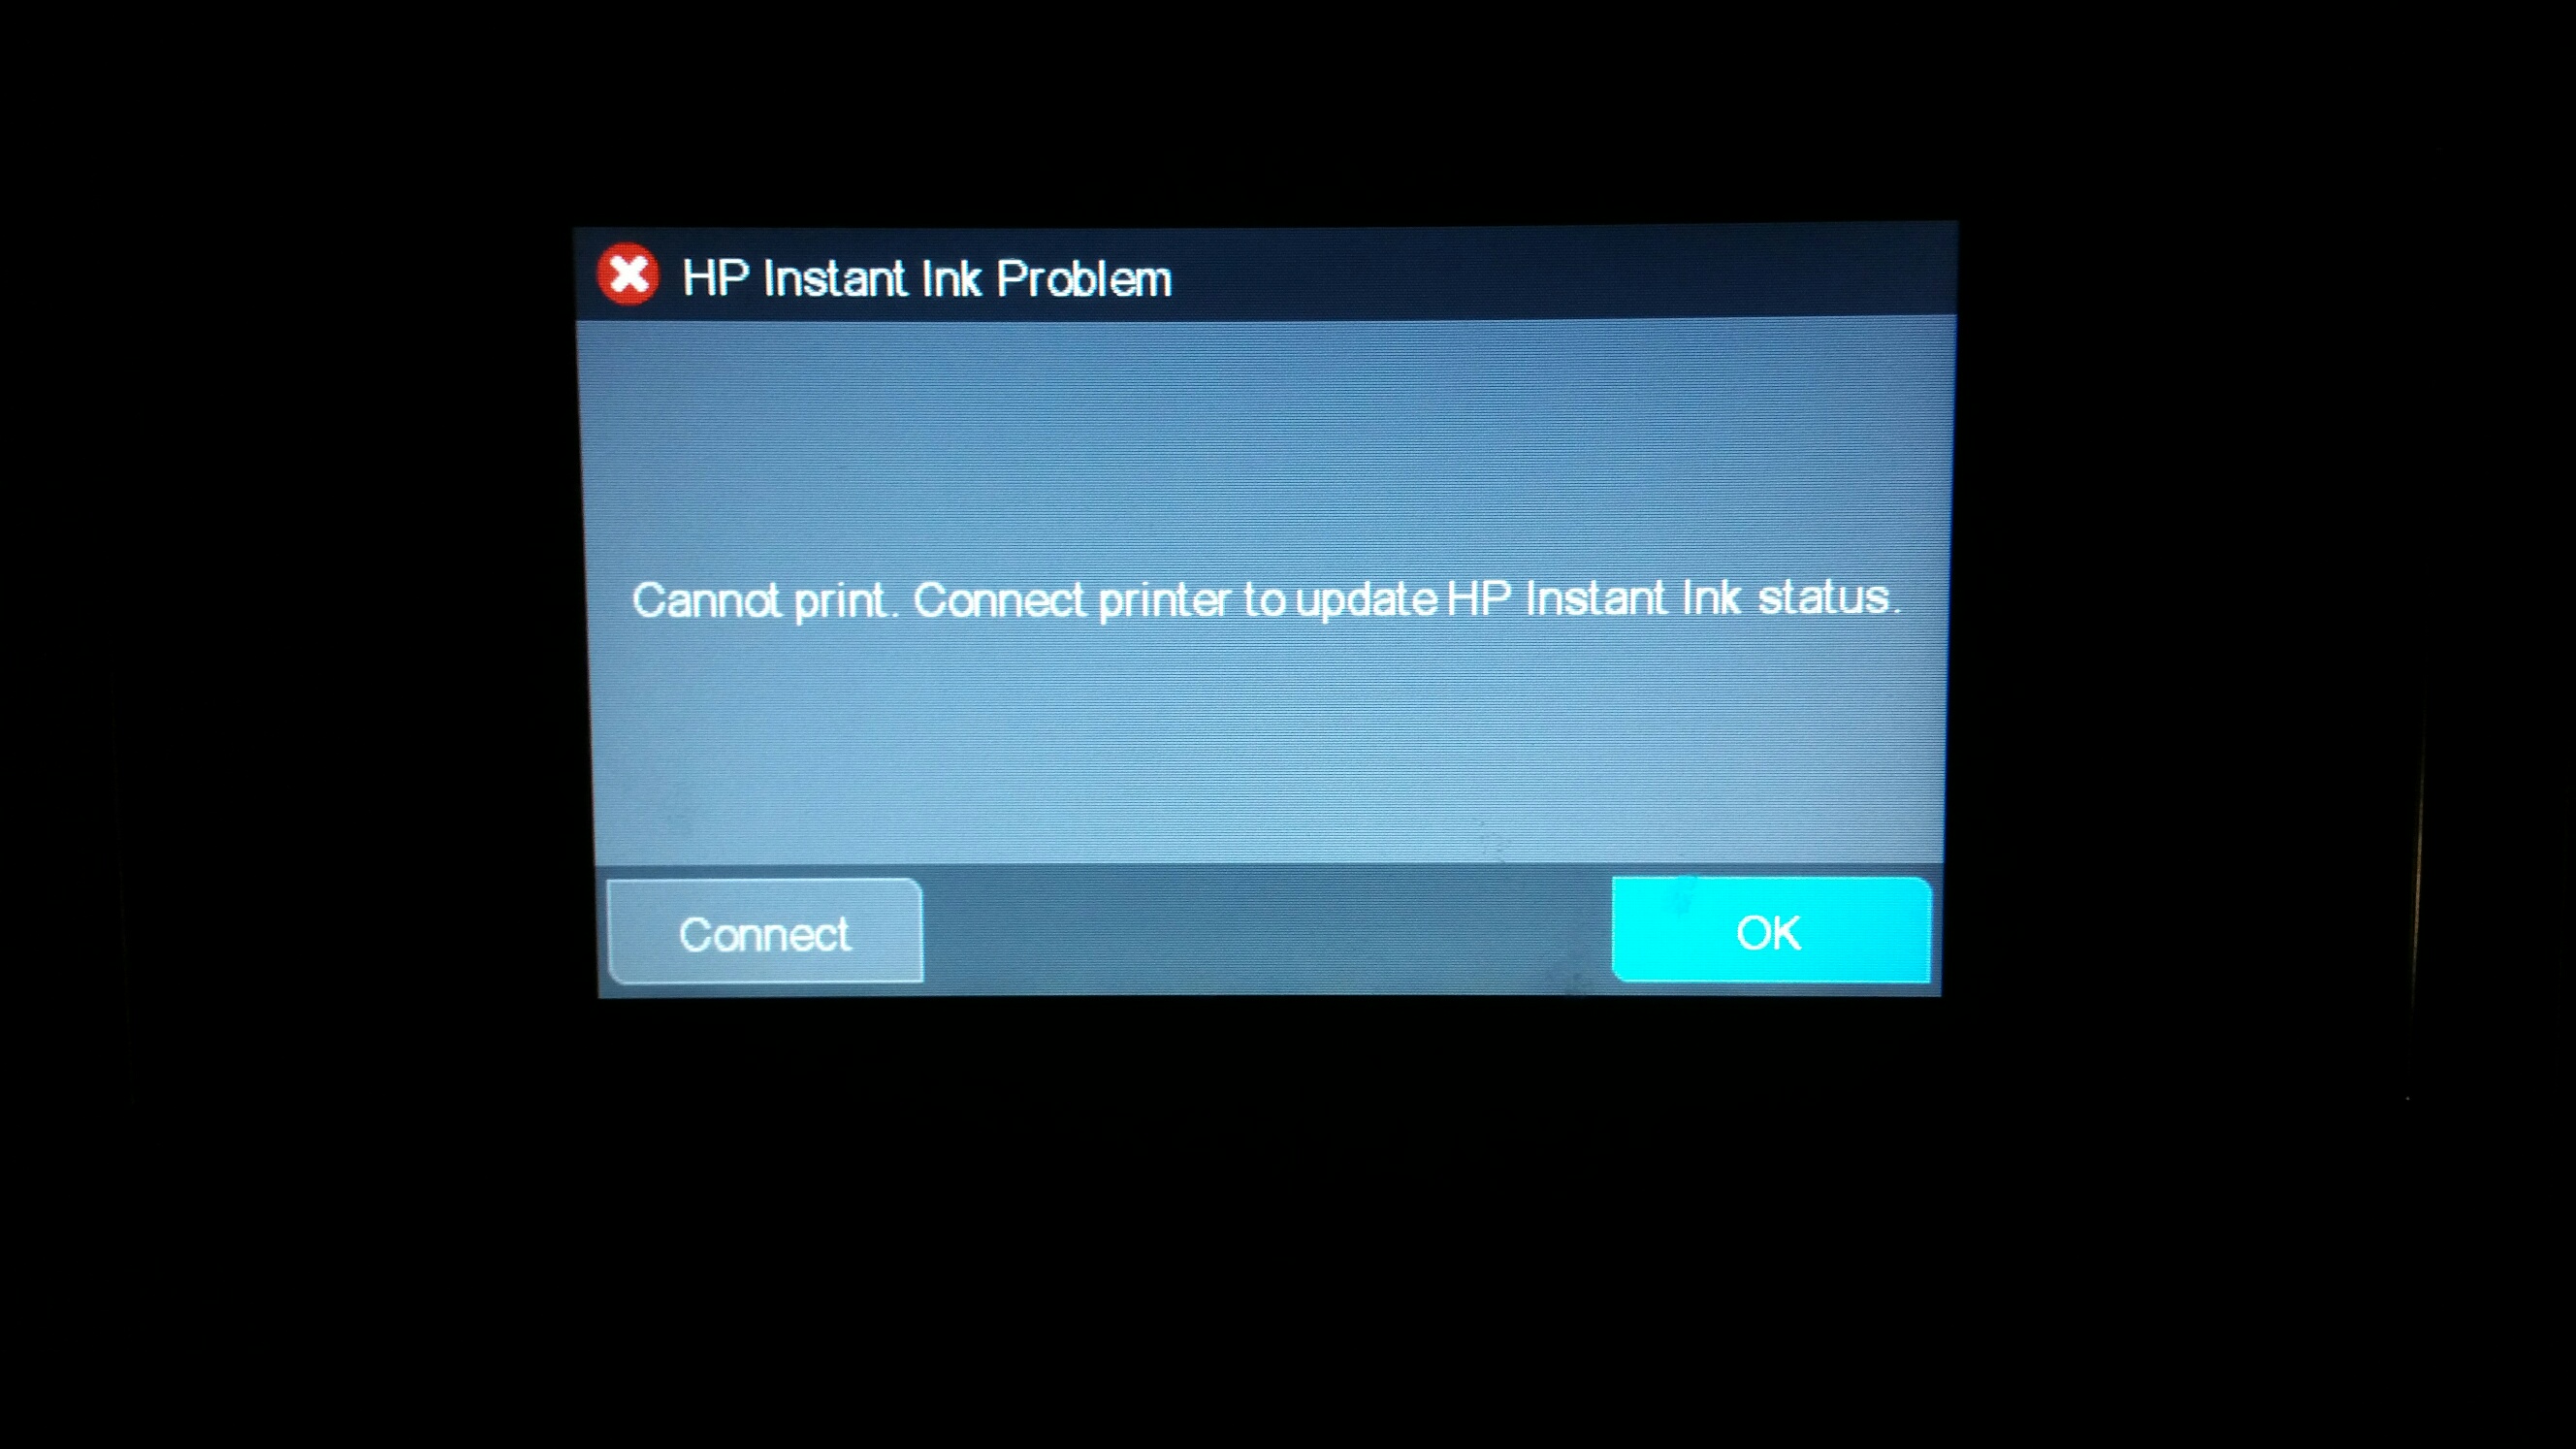 officejet pro 8620 can not connect HP ink status - HP Support Community